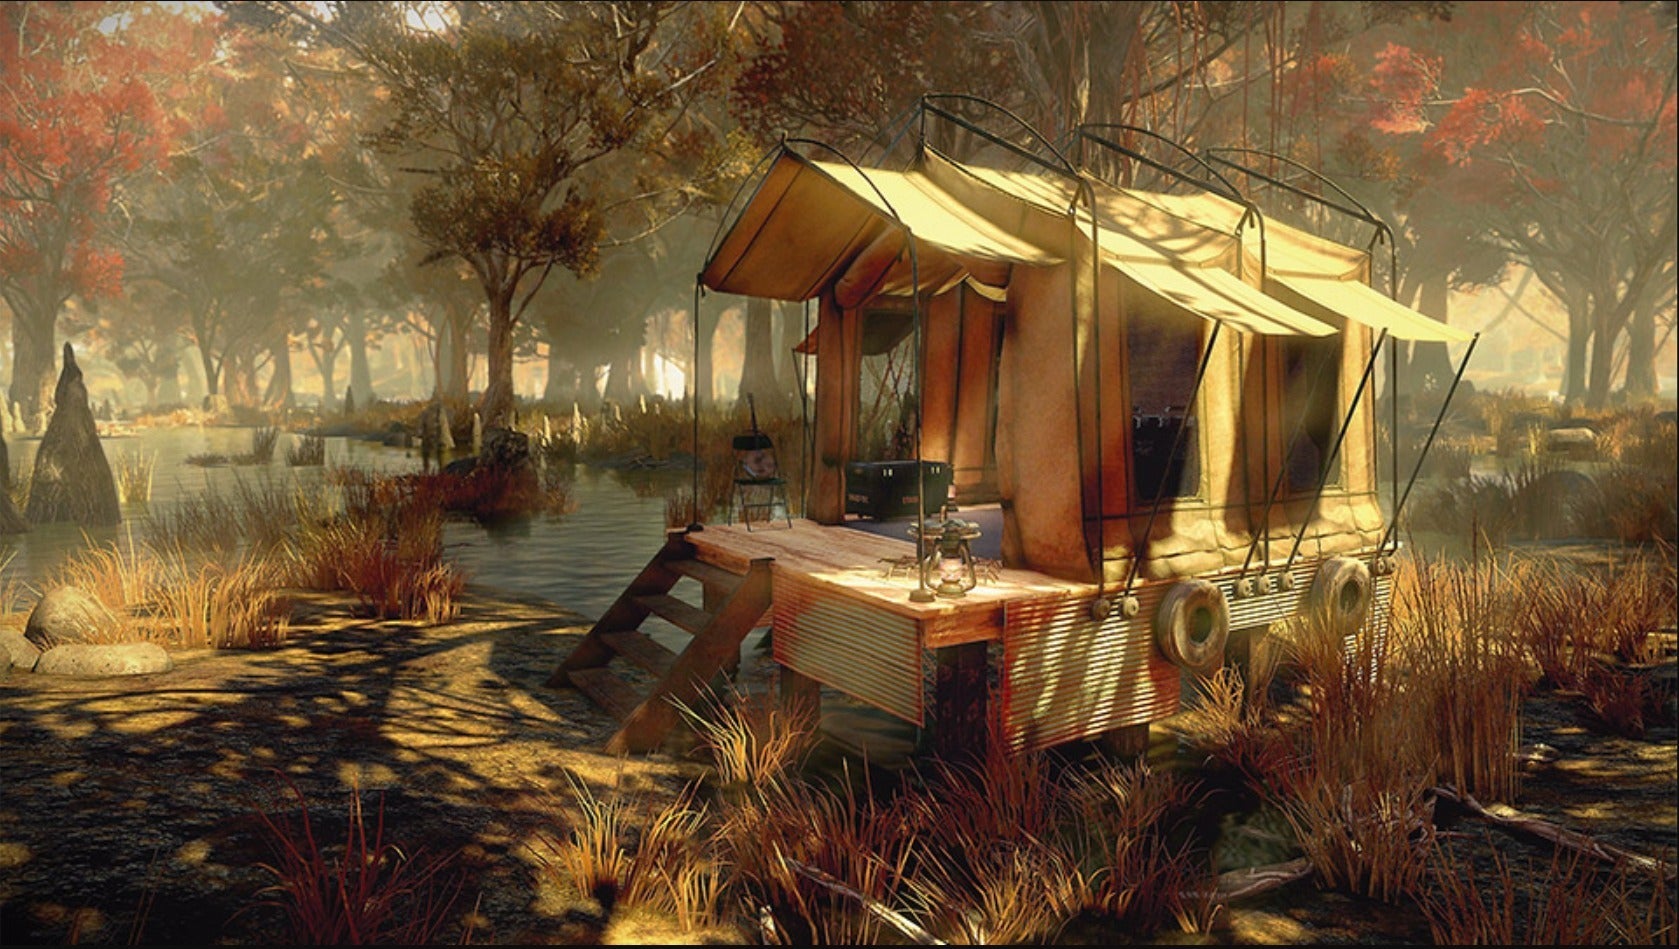 How do I move the tent in Fallout 76?